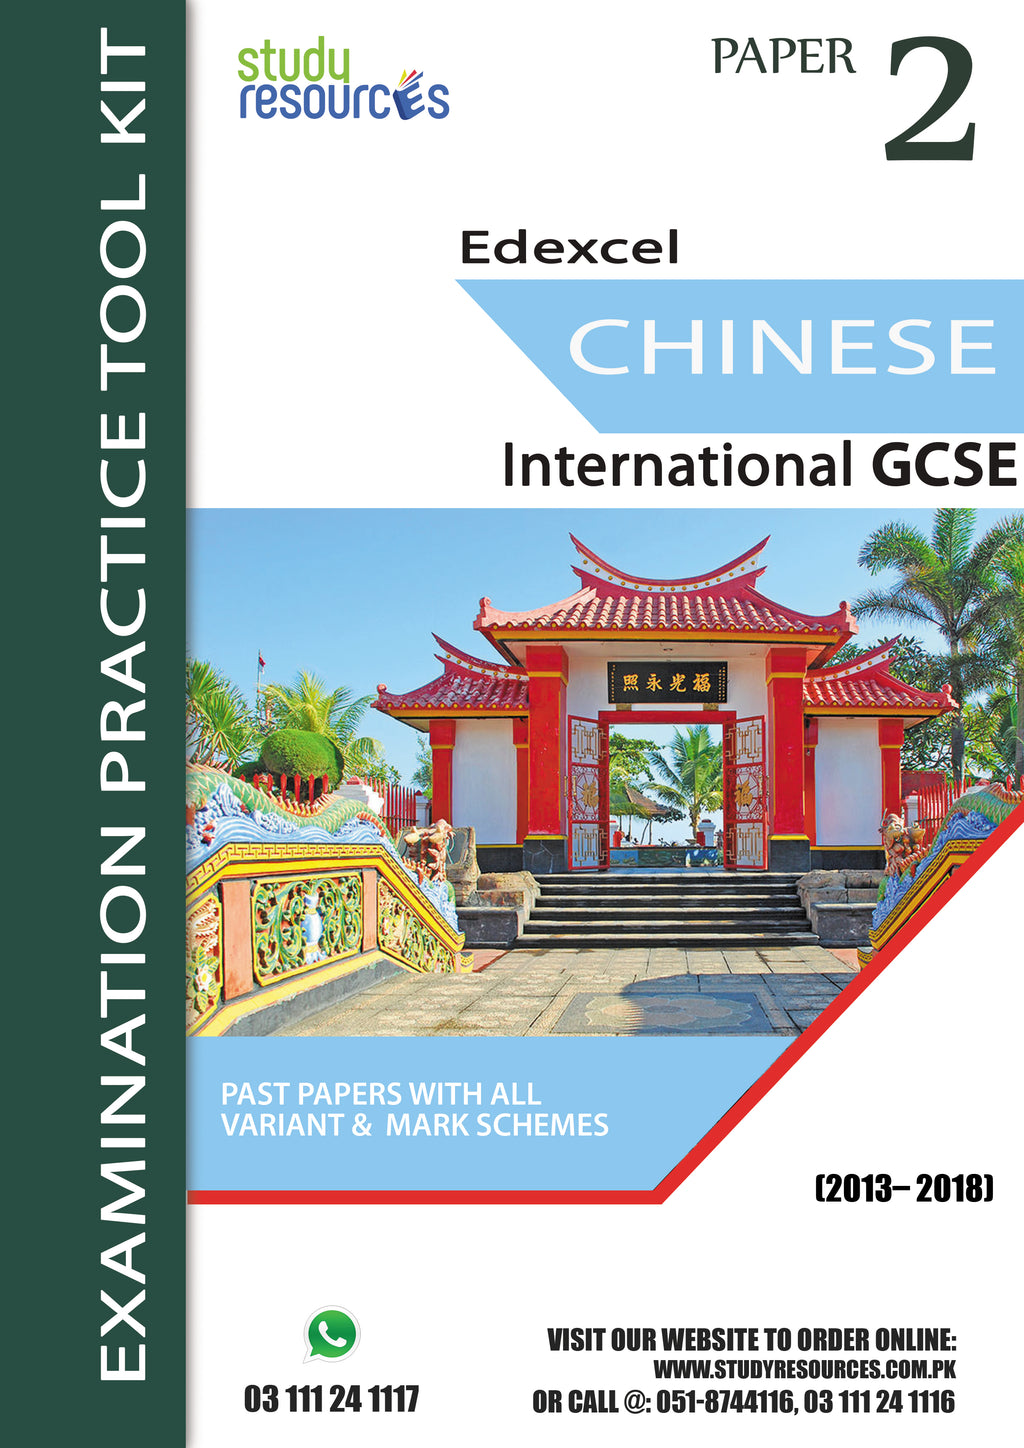 Edexcel IGCSE Chinese P-2 Past Papers (2013-2018)